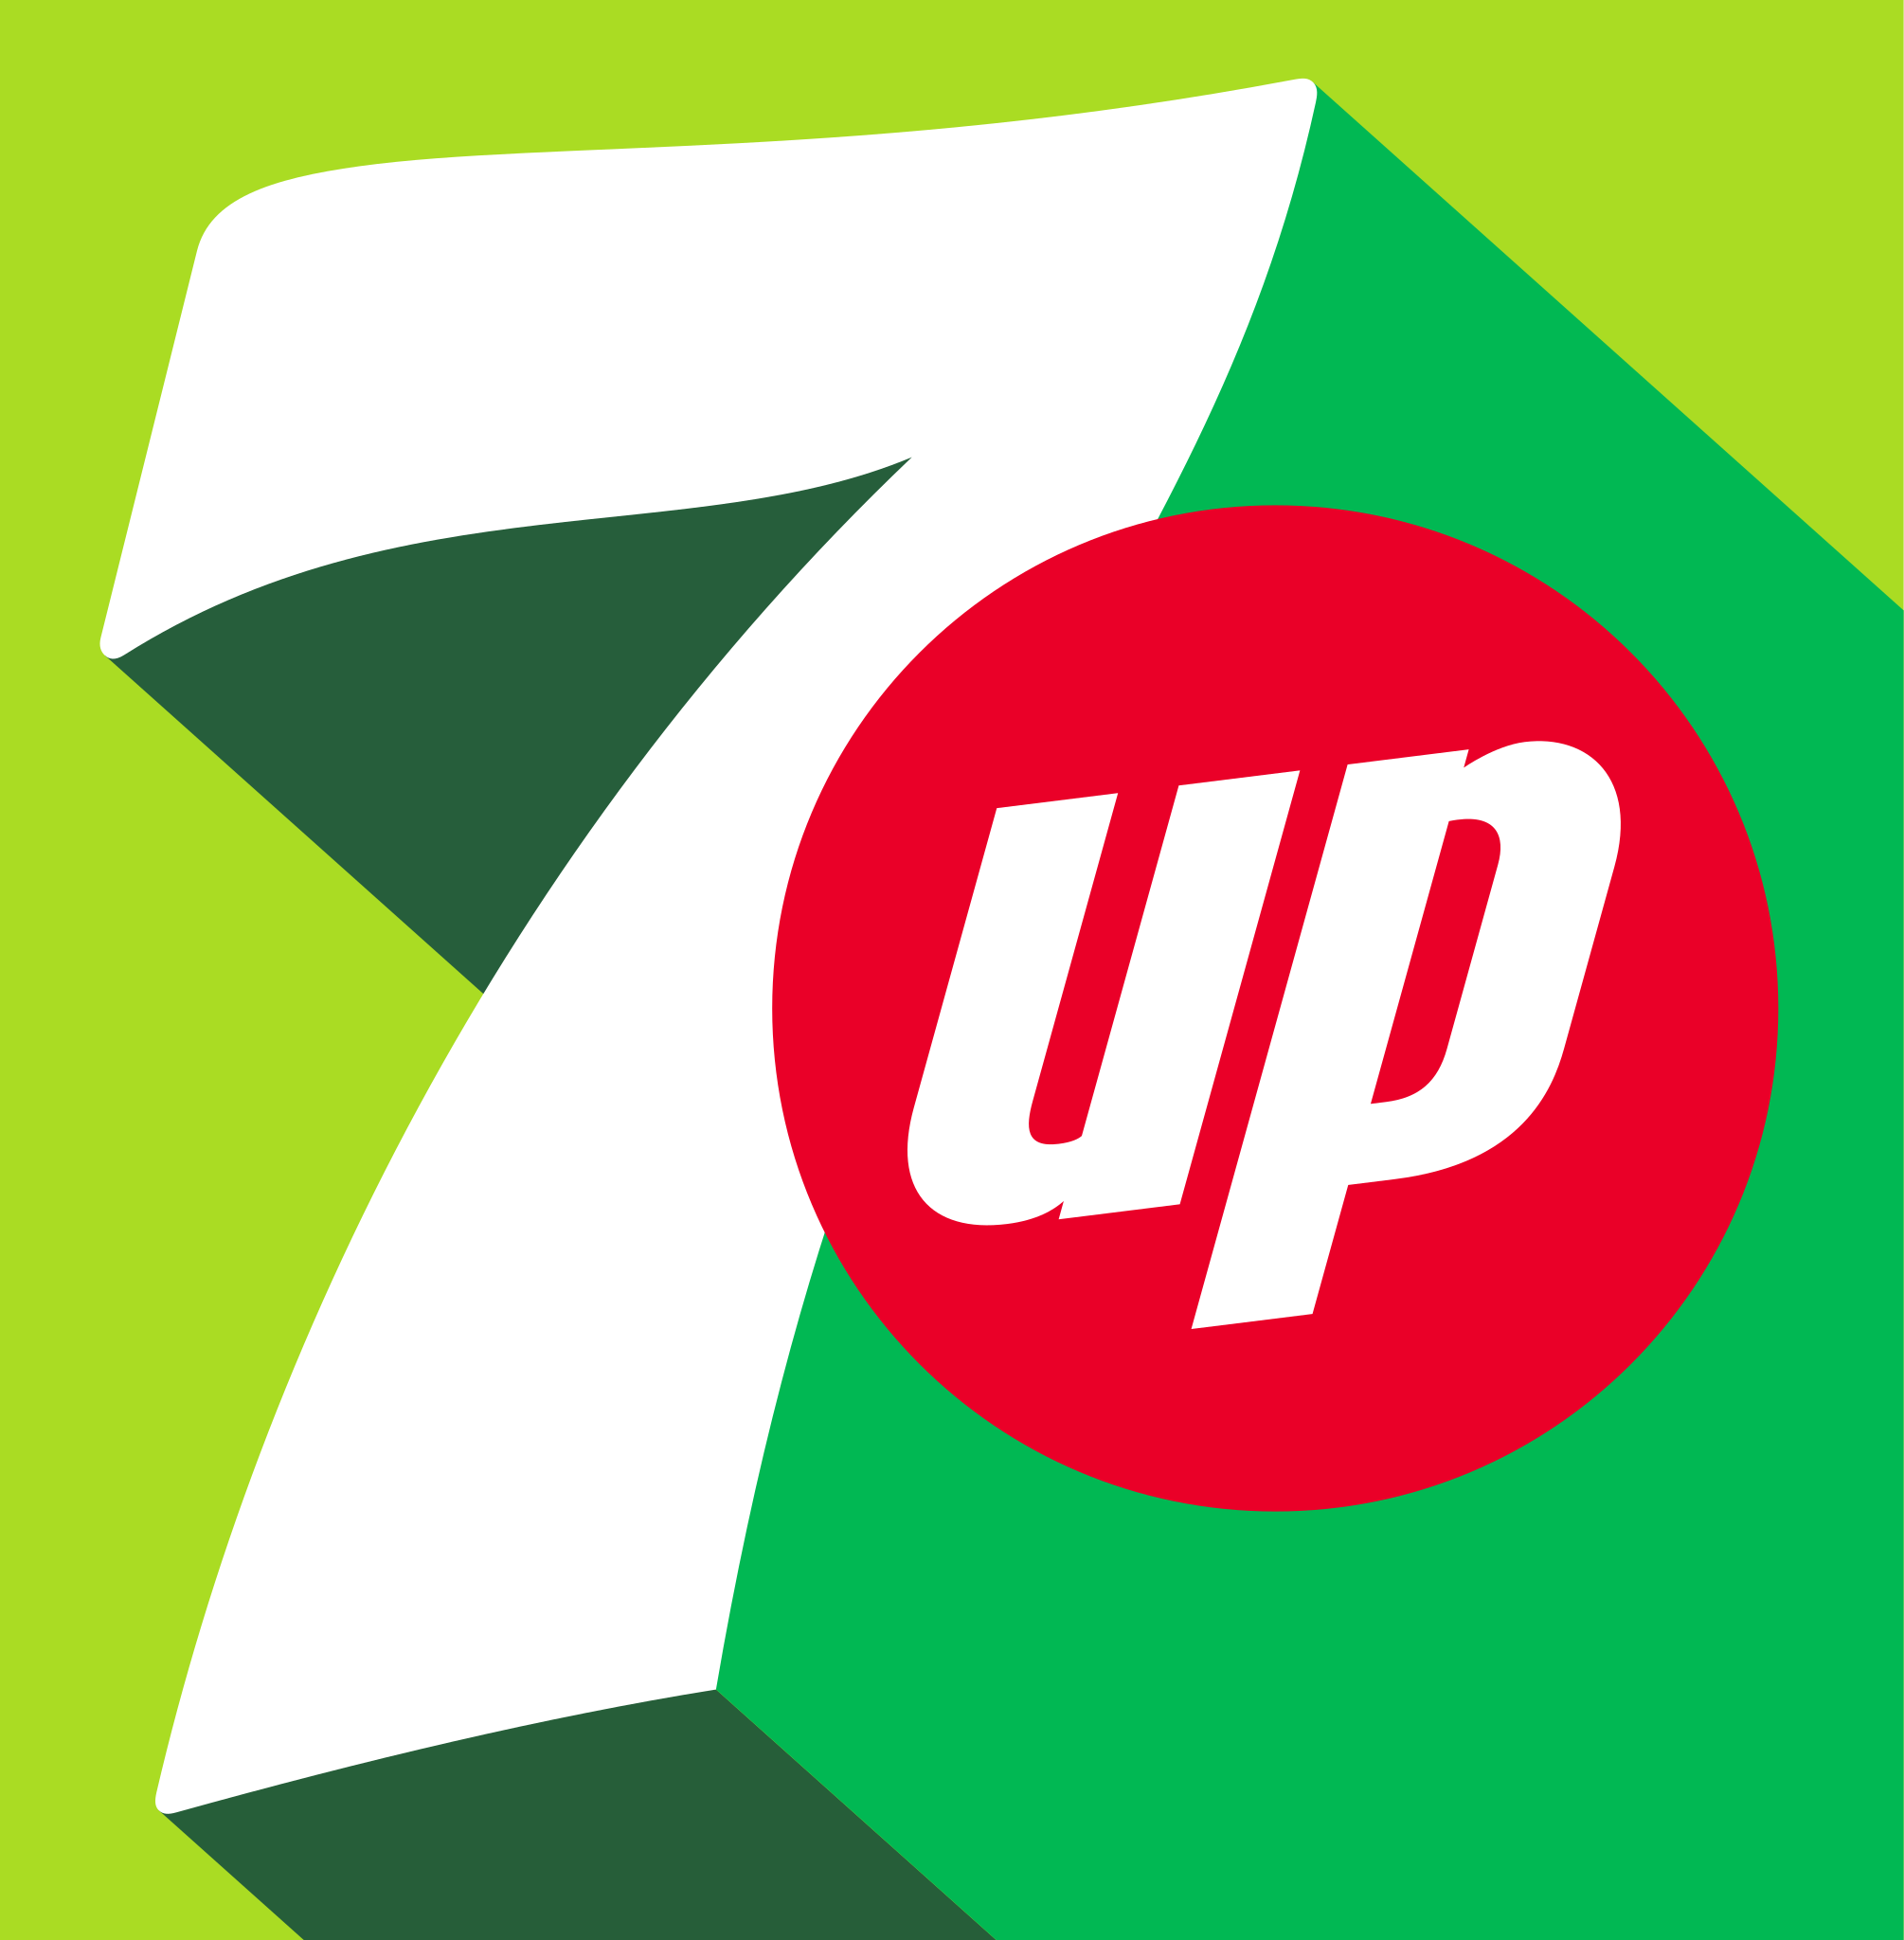 SEVEN UP